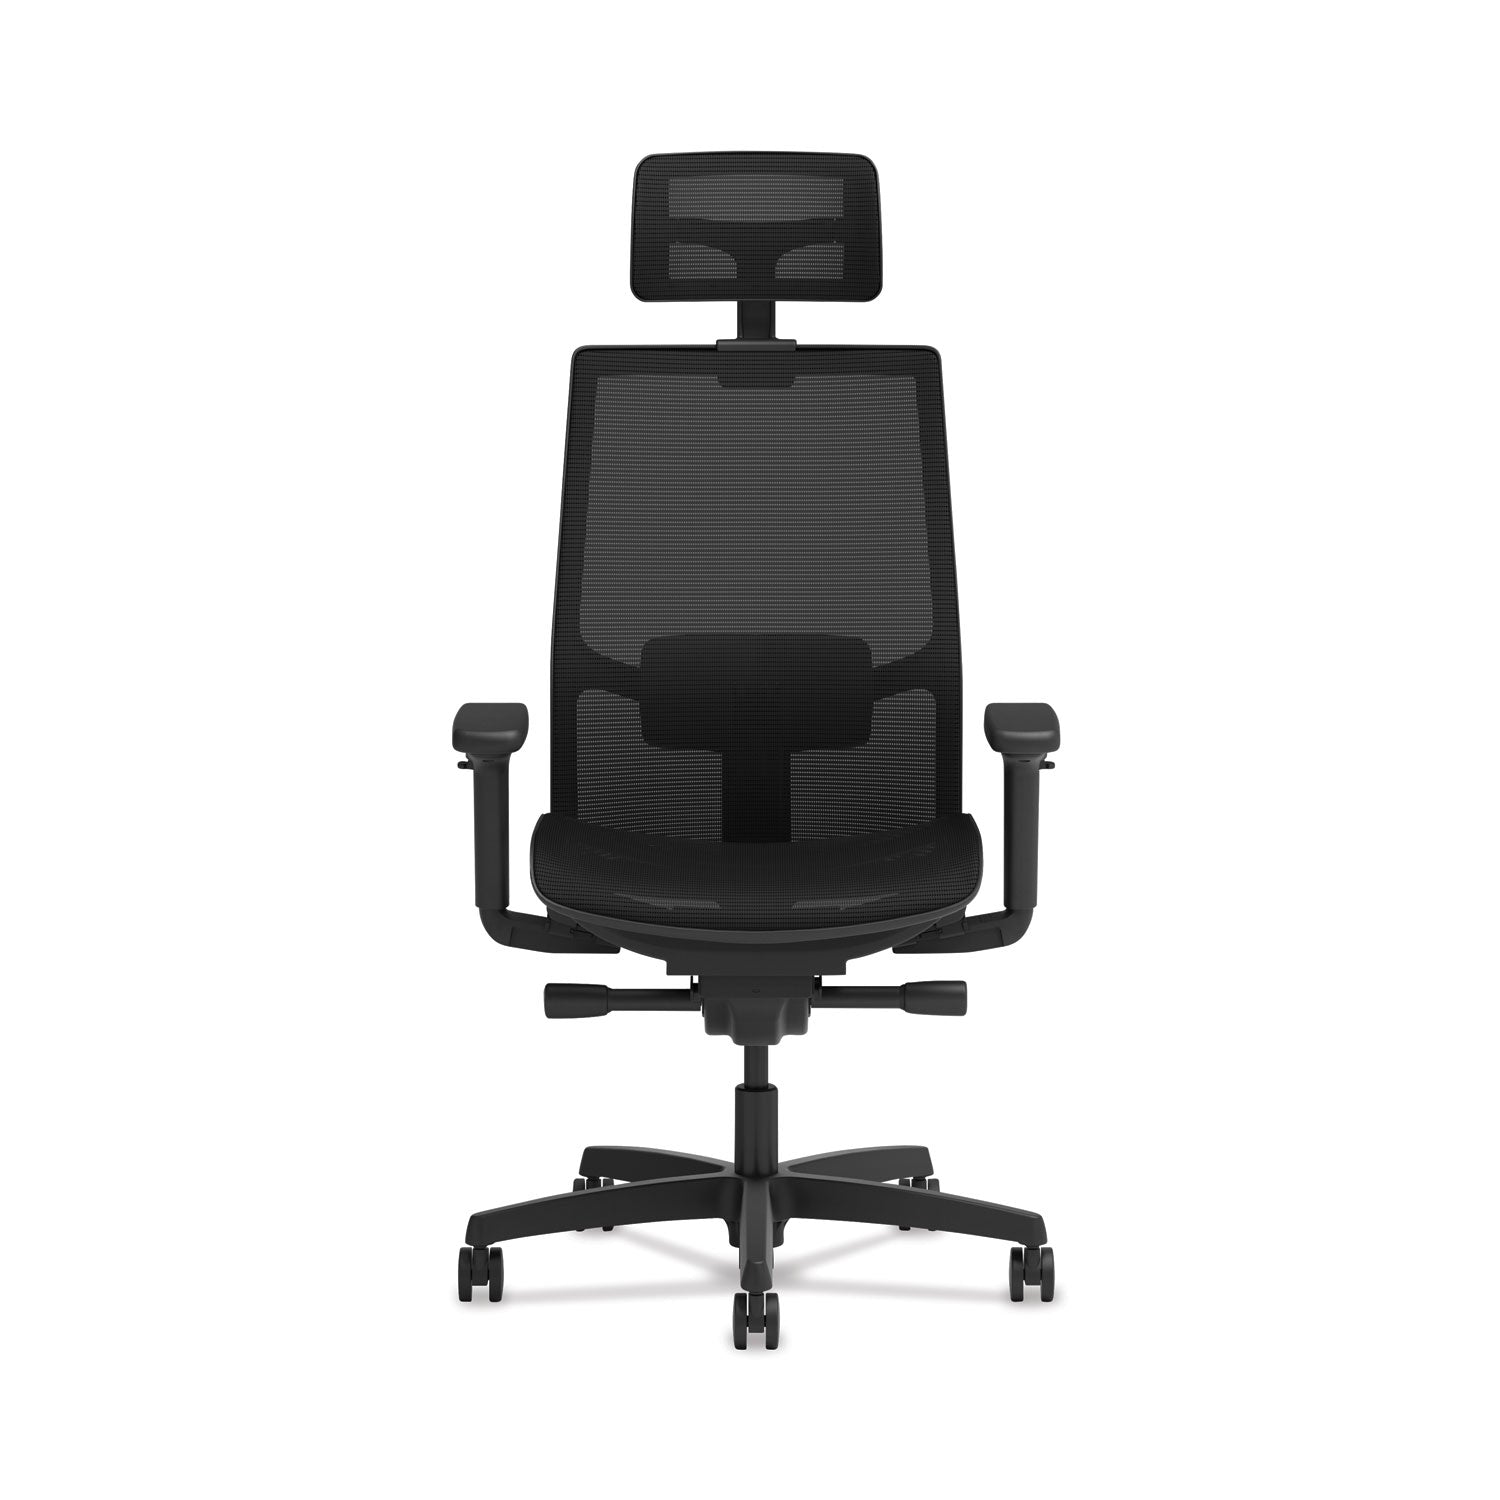 ignition-20-4-way-stretch-mesh-back-and-seat-task-chair-supports-up-to-300-lb-17-to-21-seat-black-seat-black-base_honi2msky2imthr - 3